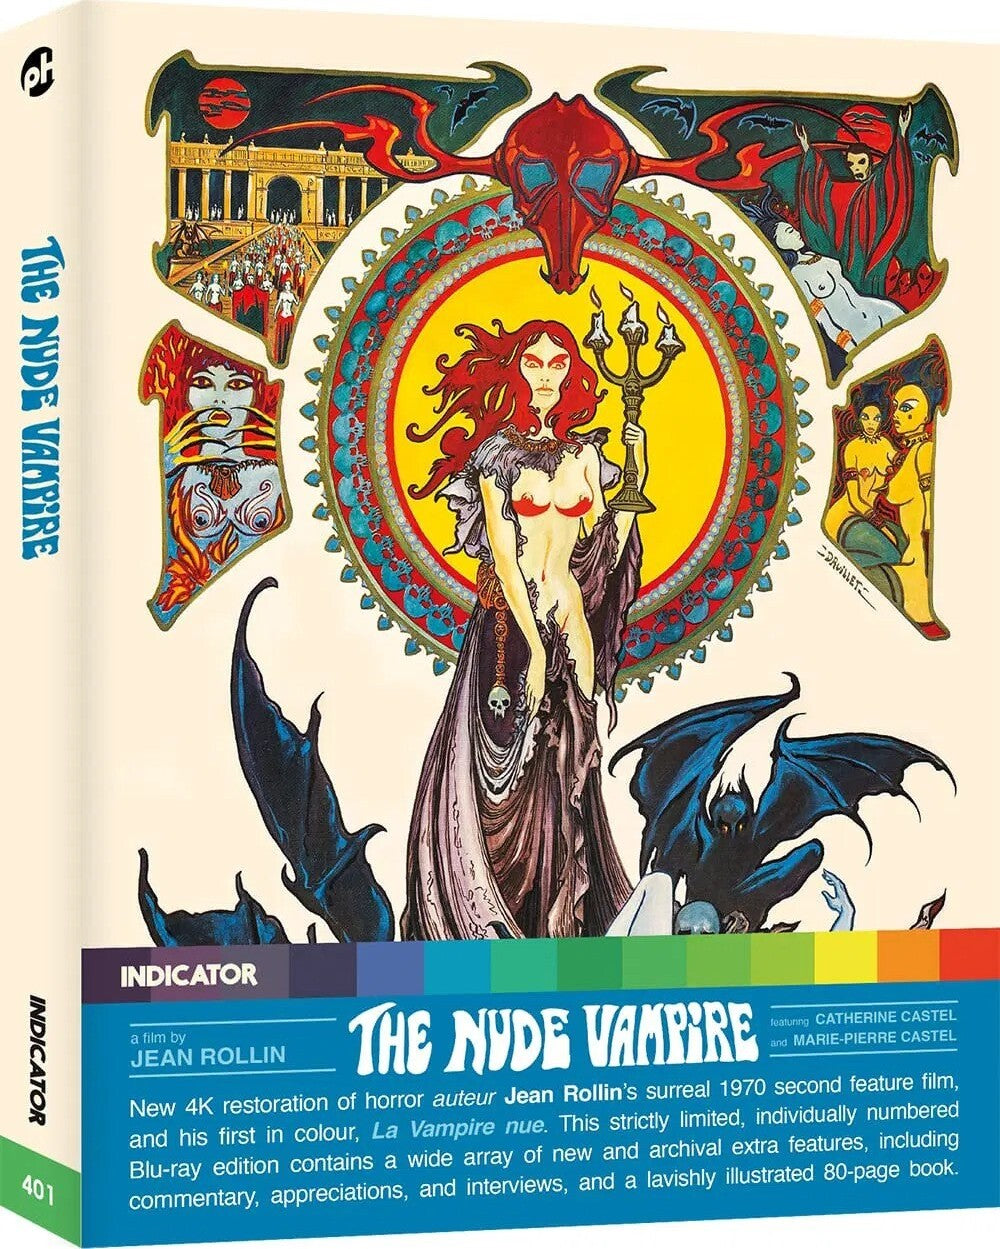 THE NUDE VAMPIRE (LIMITED EDITION) BLU-RAY